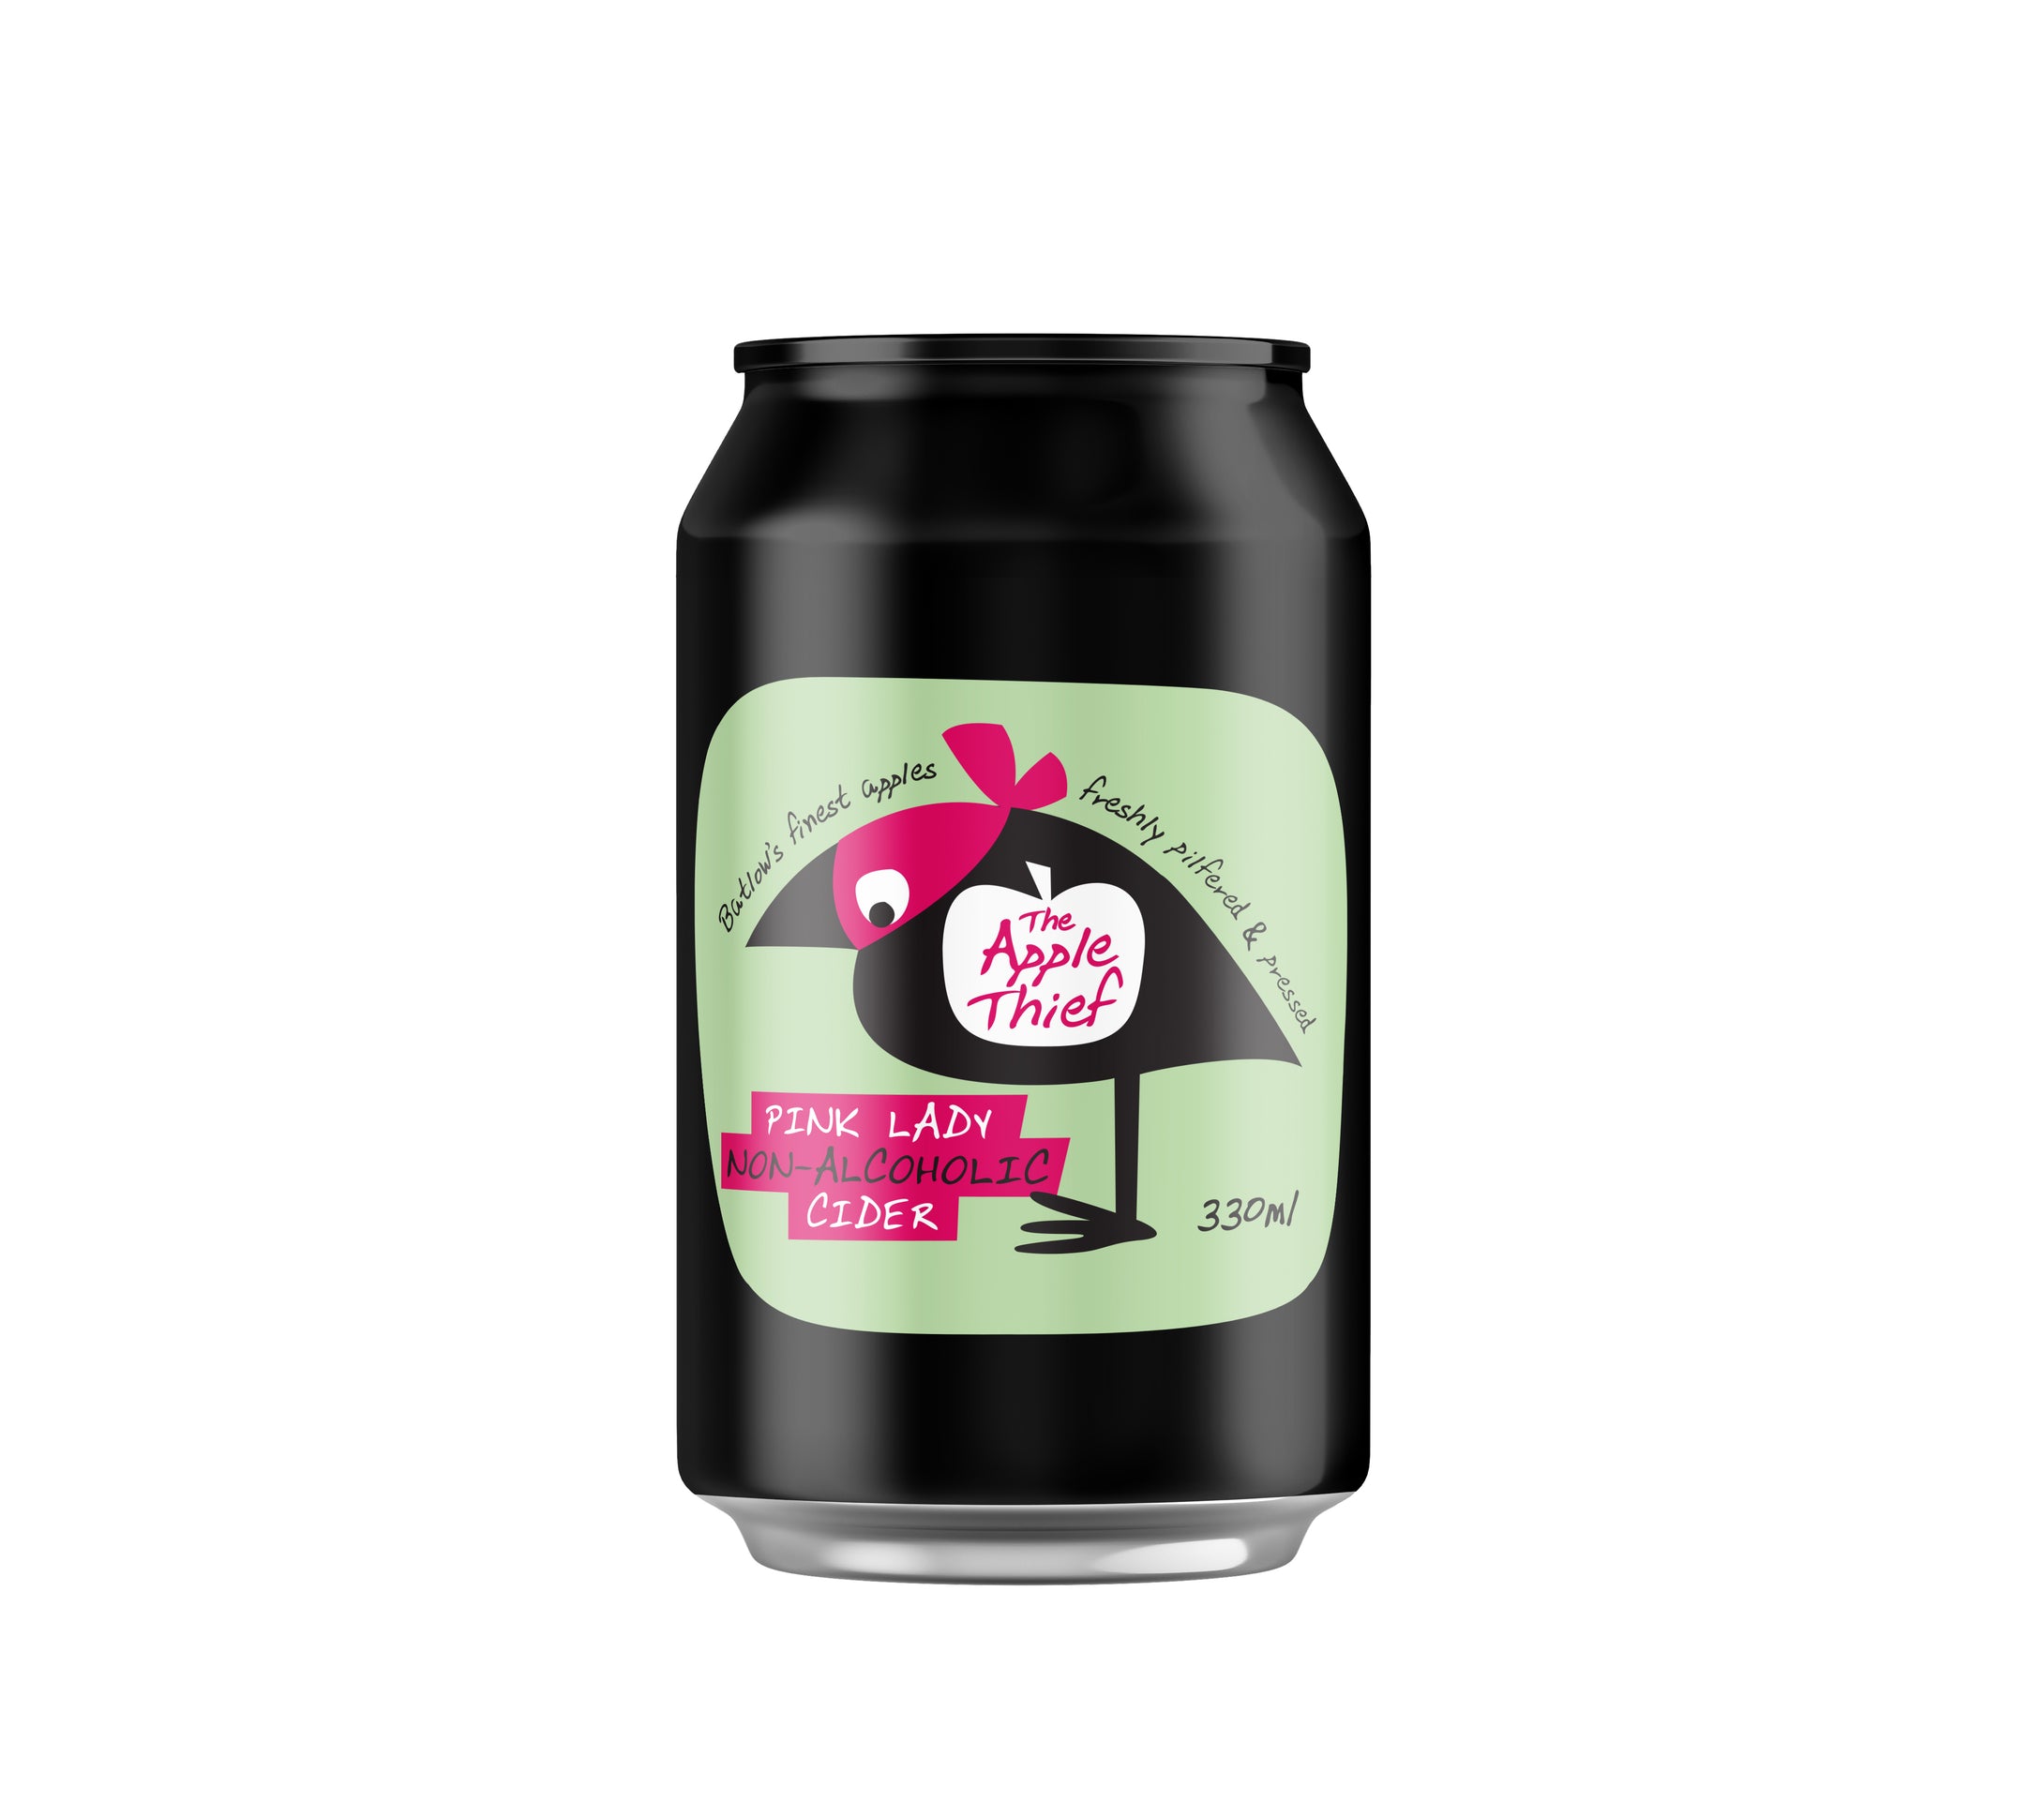 PINK LADY NON-ALCOHOLIC CIDER